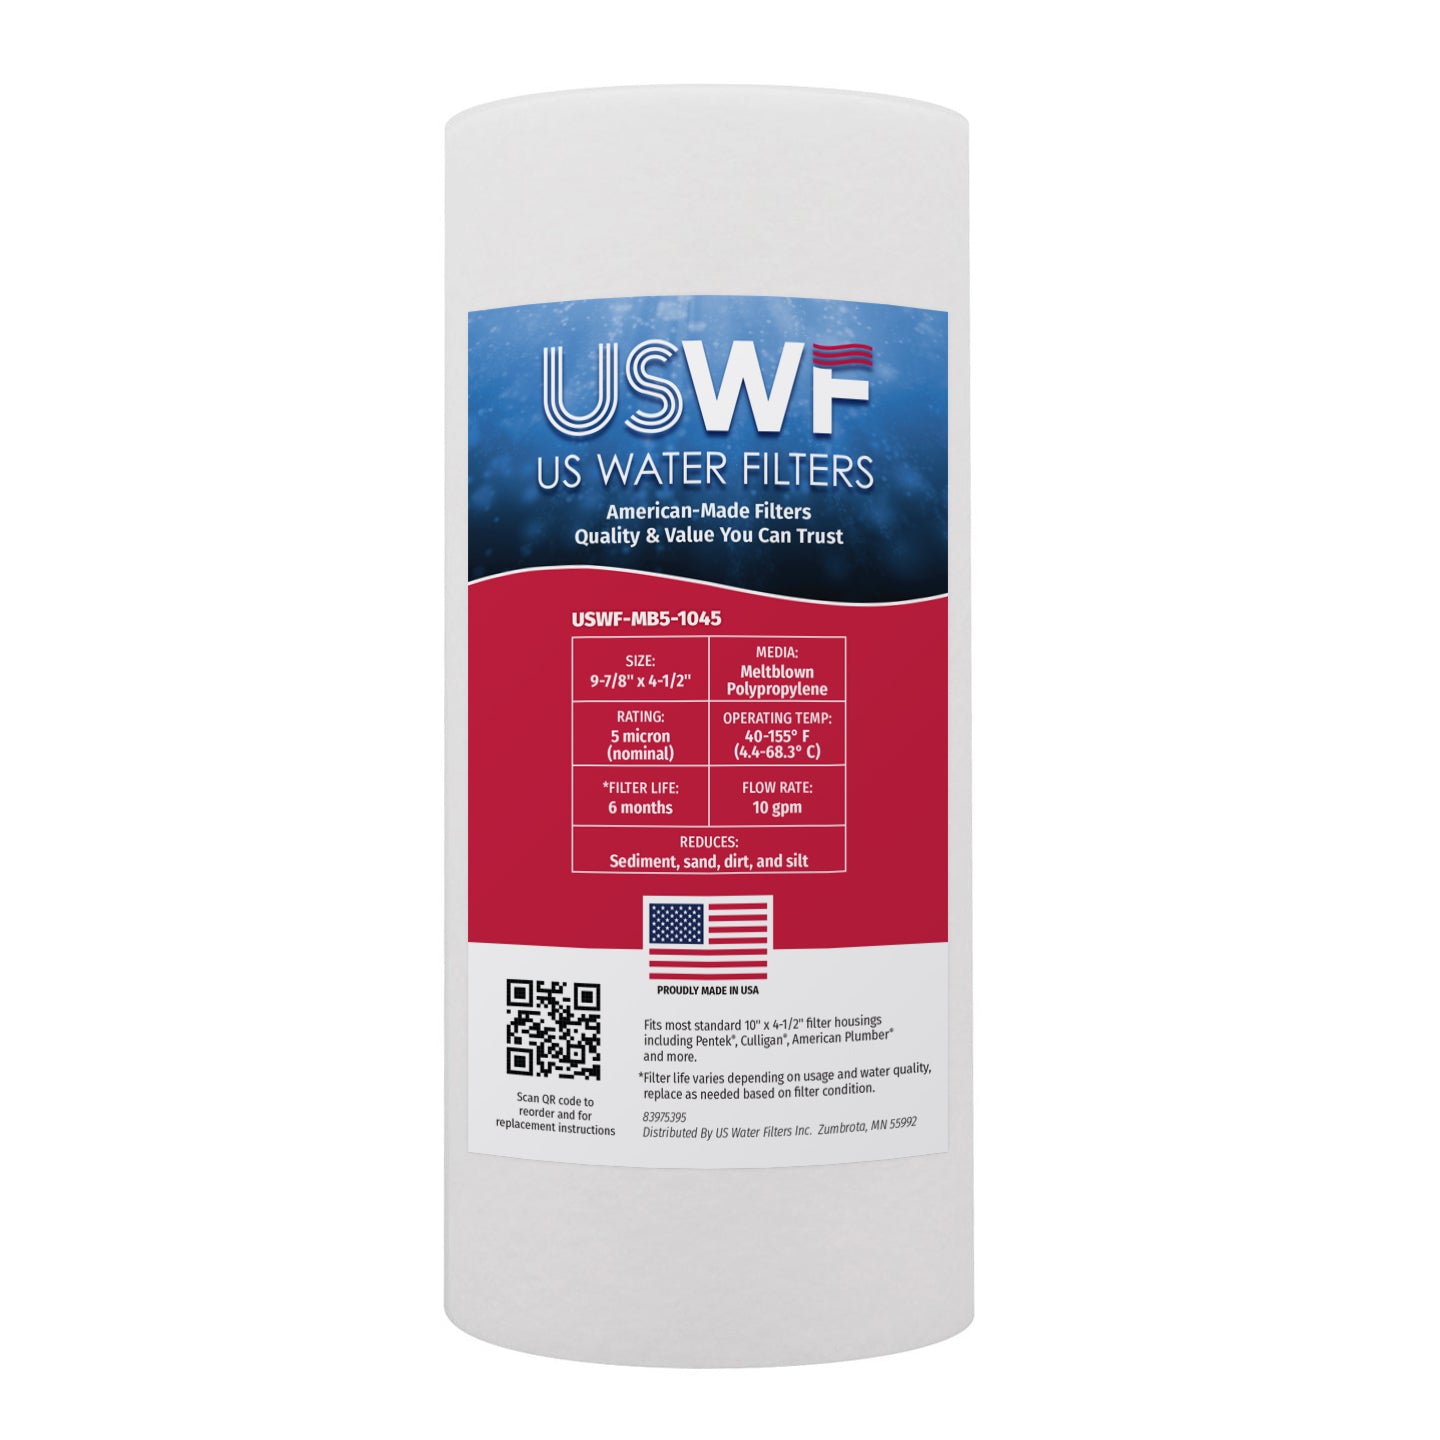 2-Stage Chloramine Reduction Whole House Water Filtration System by USWF, Sediment and Chloramine Reduction Carbon Block, 1" Inlet/Outlet